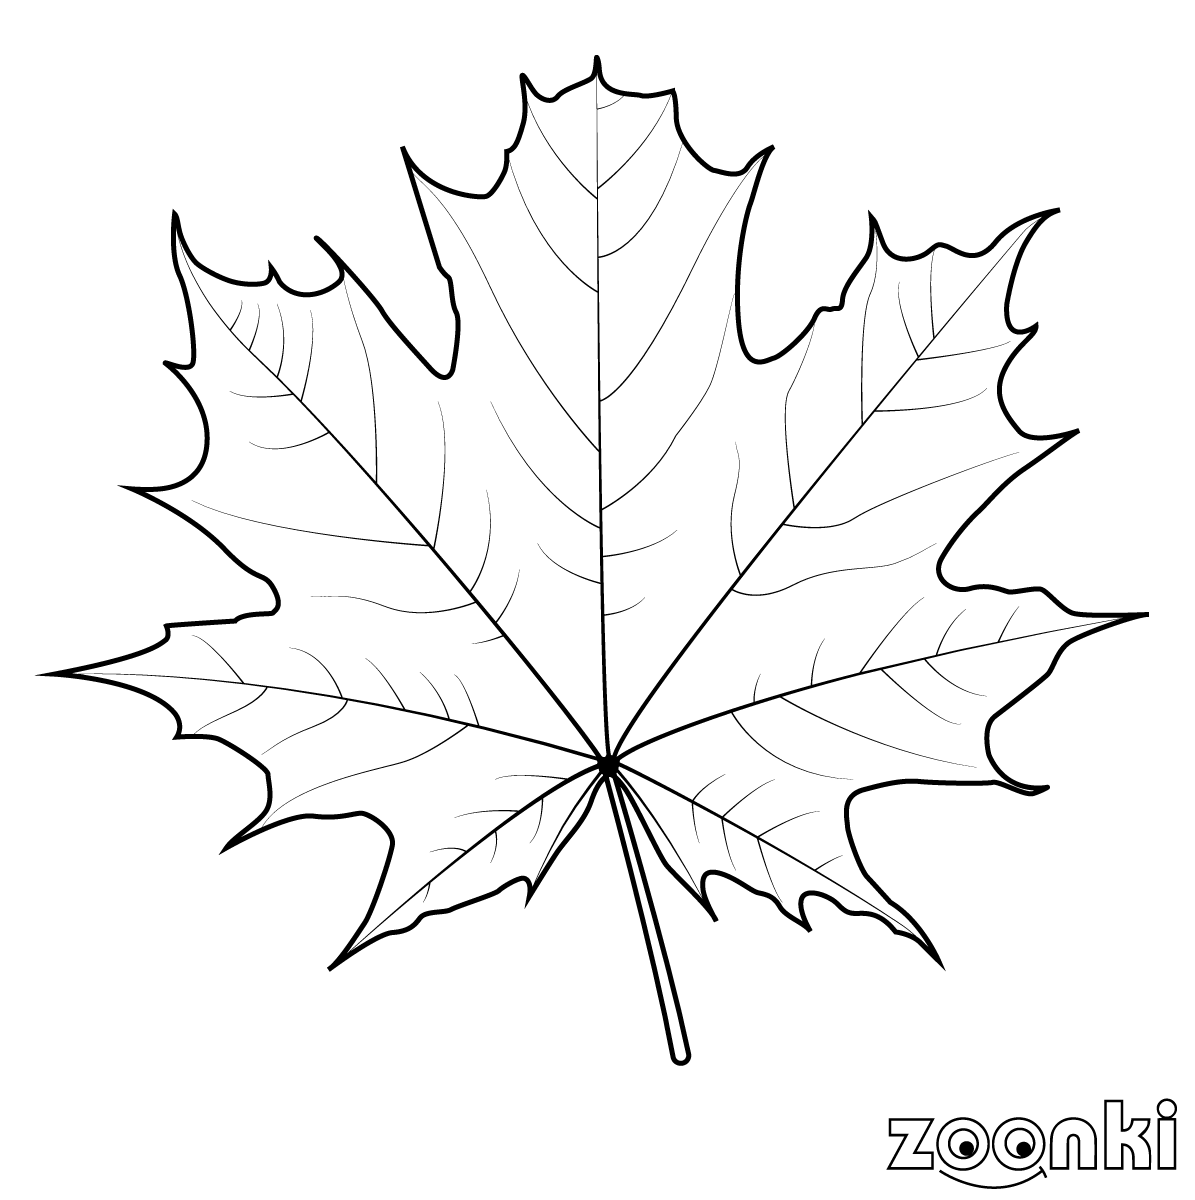 zoonki black & white clone leaf - coloring pages